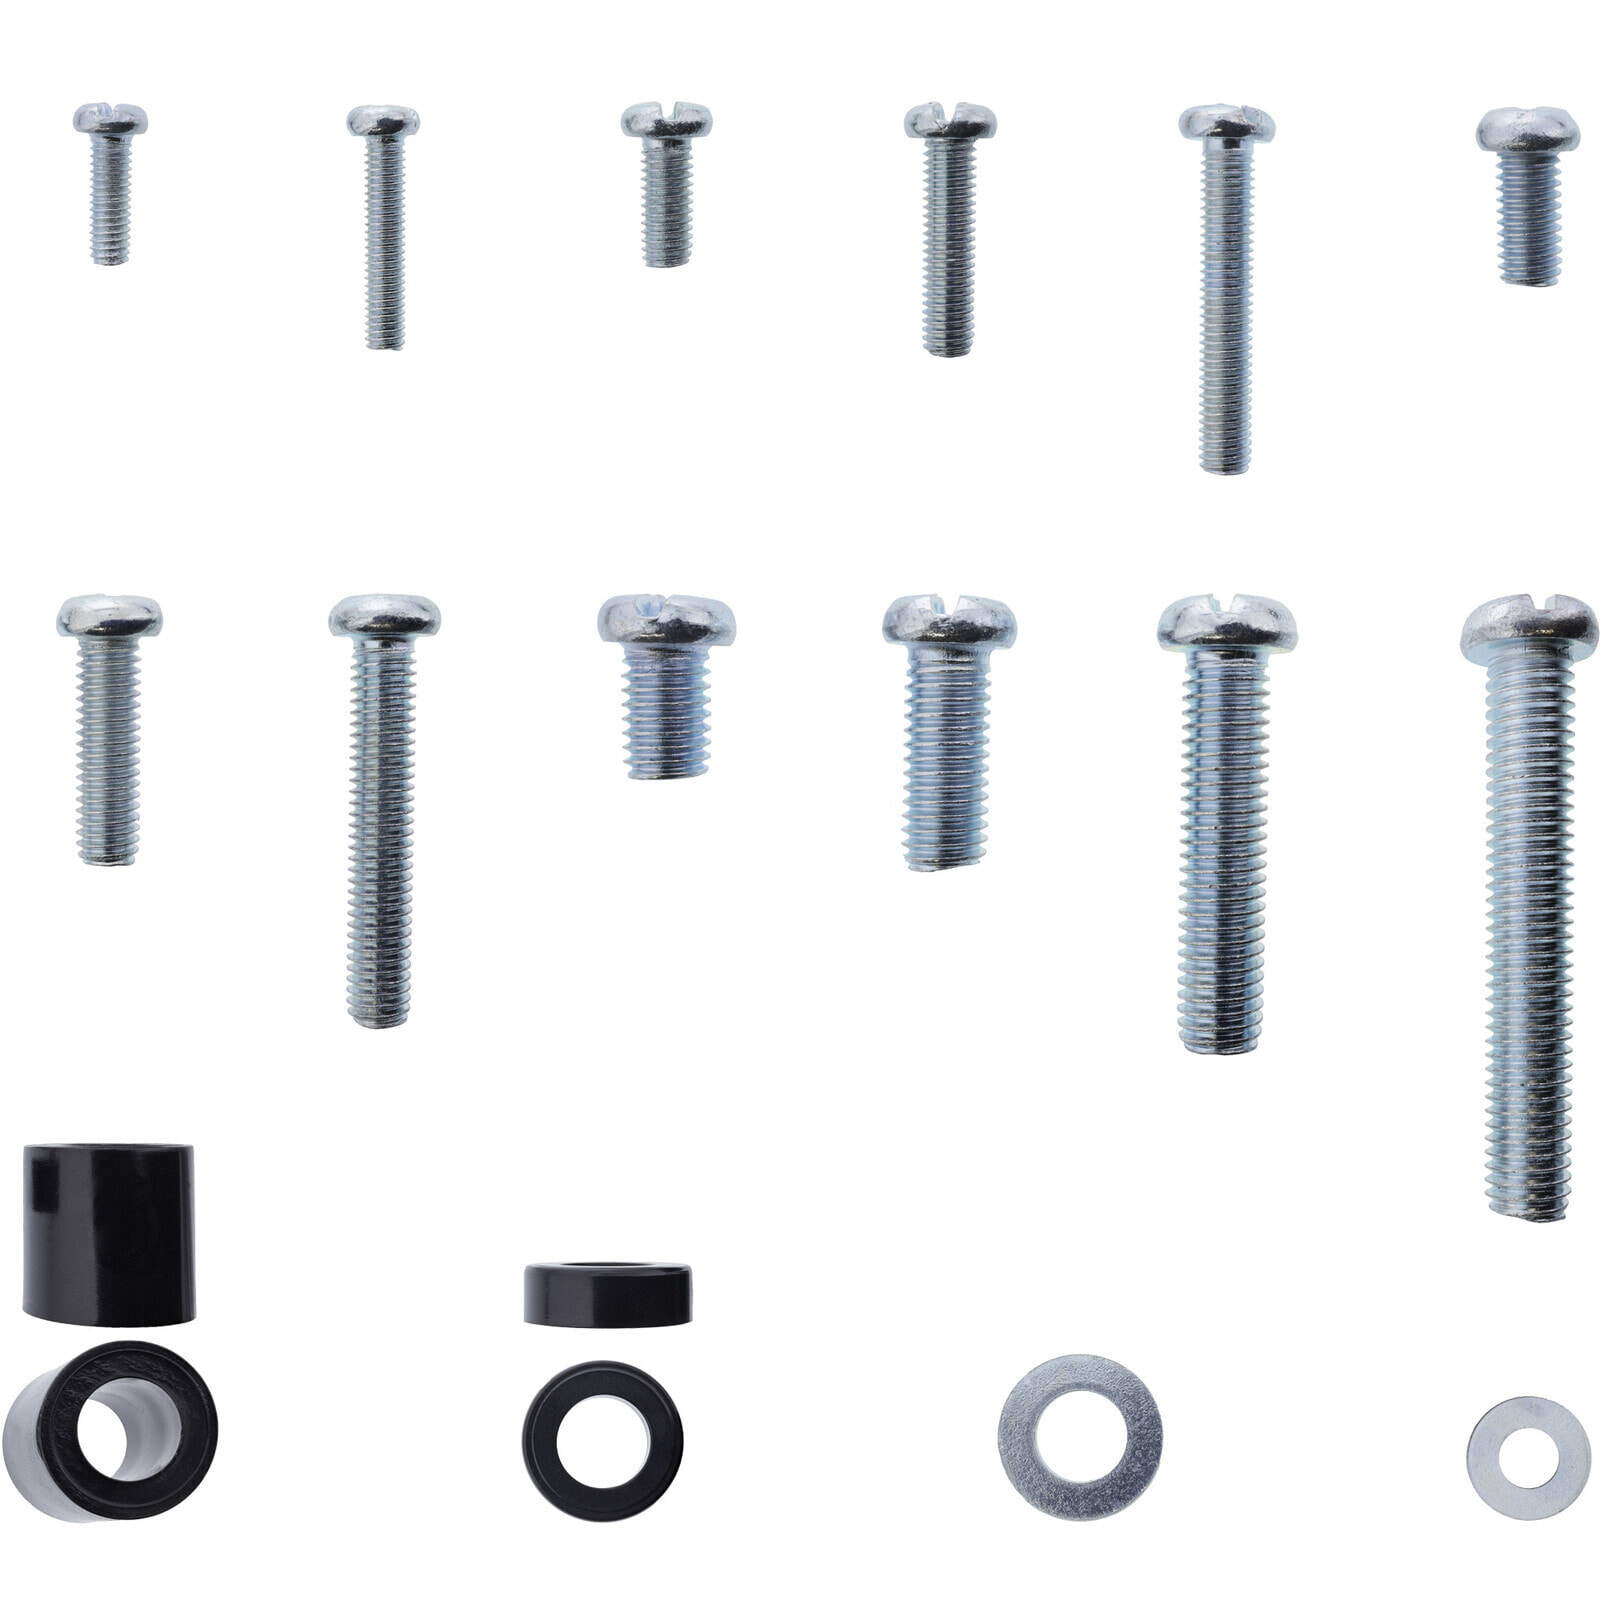 Screw set 68 pieces for TV wall mount